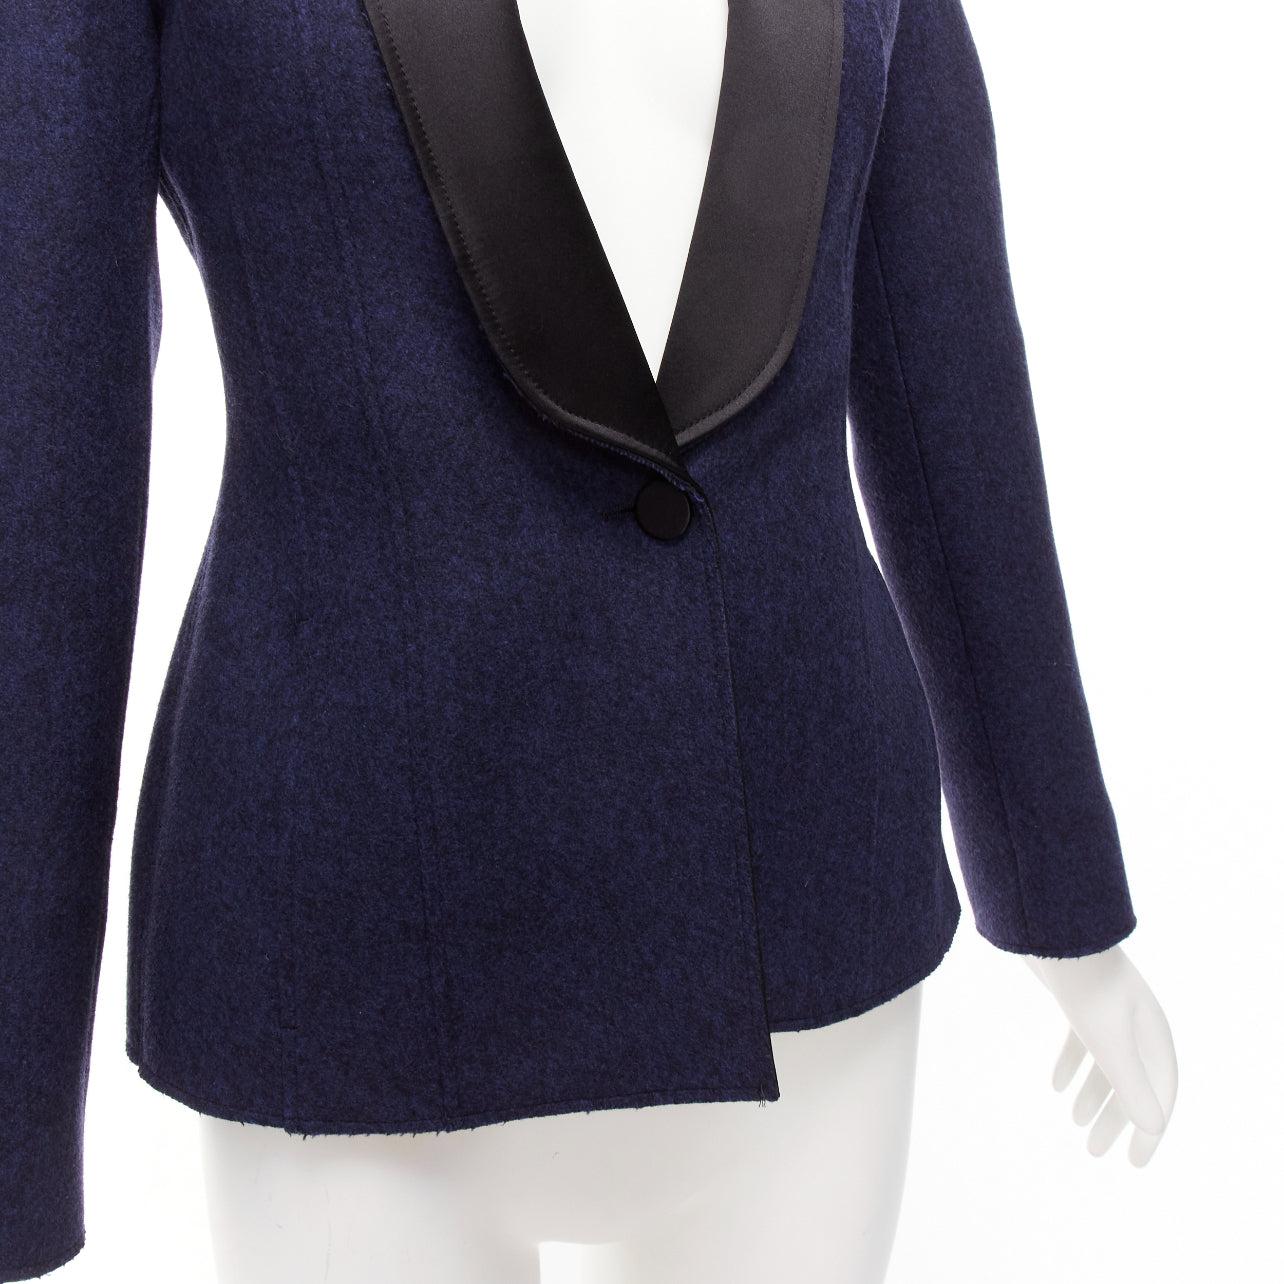 MAISON MARGIELA navy black wool blend satin collar tuxedo blazer FR36 S
Reference: EALU/A00016
Brand: Maison Margiela
Designer: Martin Margiela
Material: Wool, Blend
Color: Navy, Black
Pattern: Solid
Closure: Button
Lining: Navy Fabric
Made in: